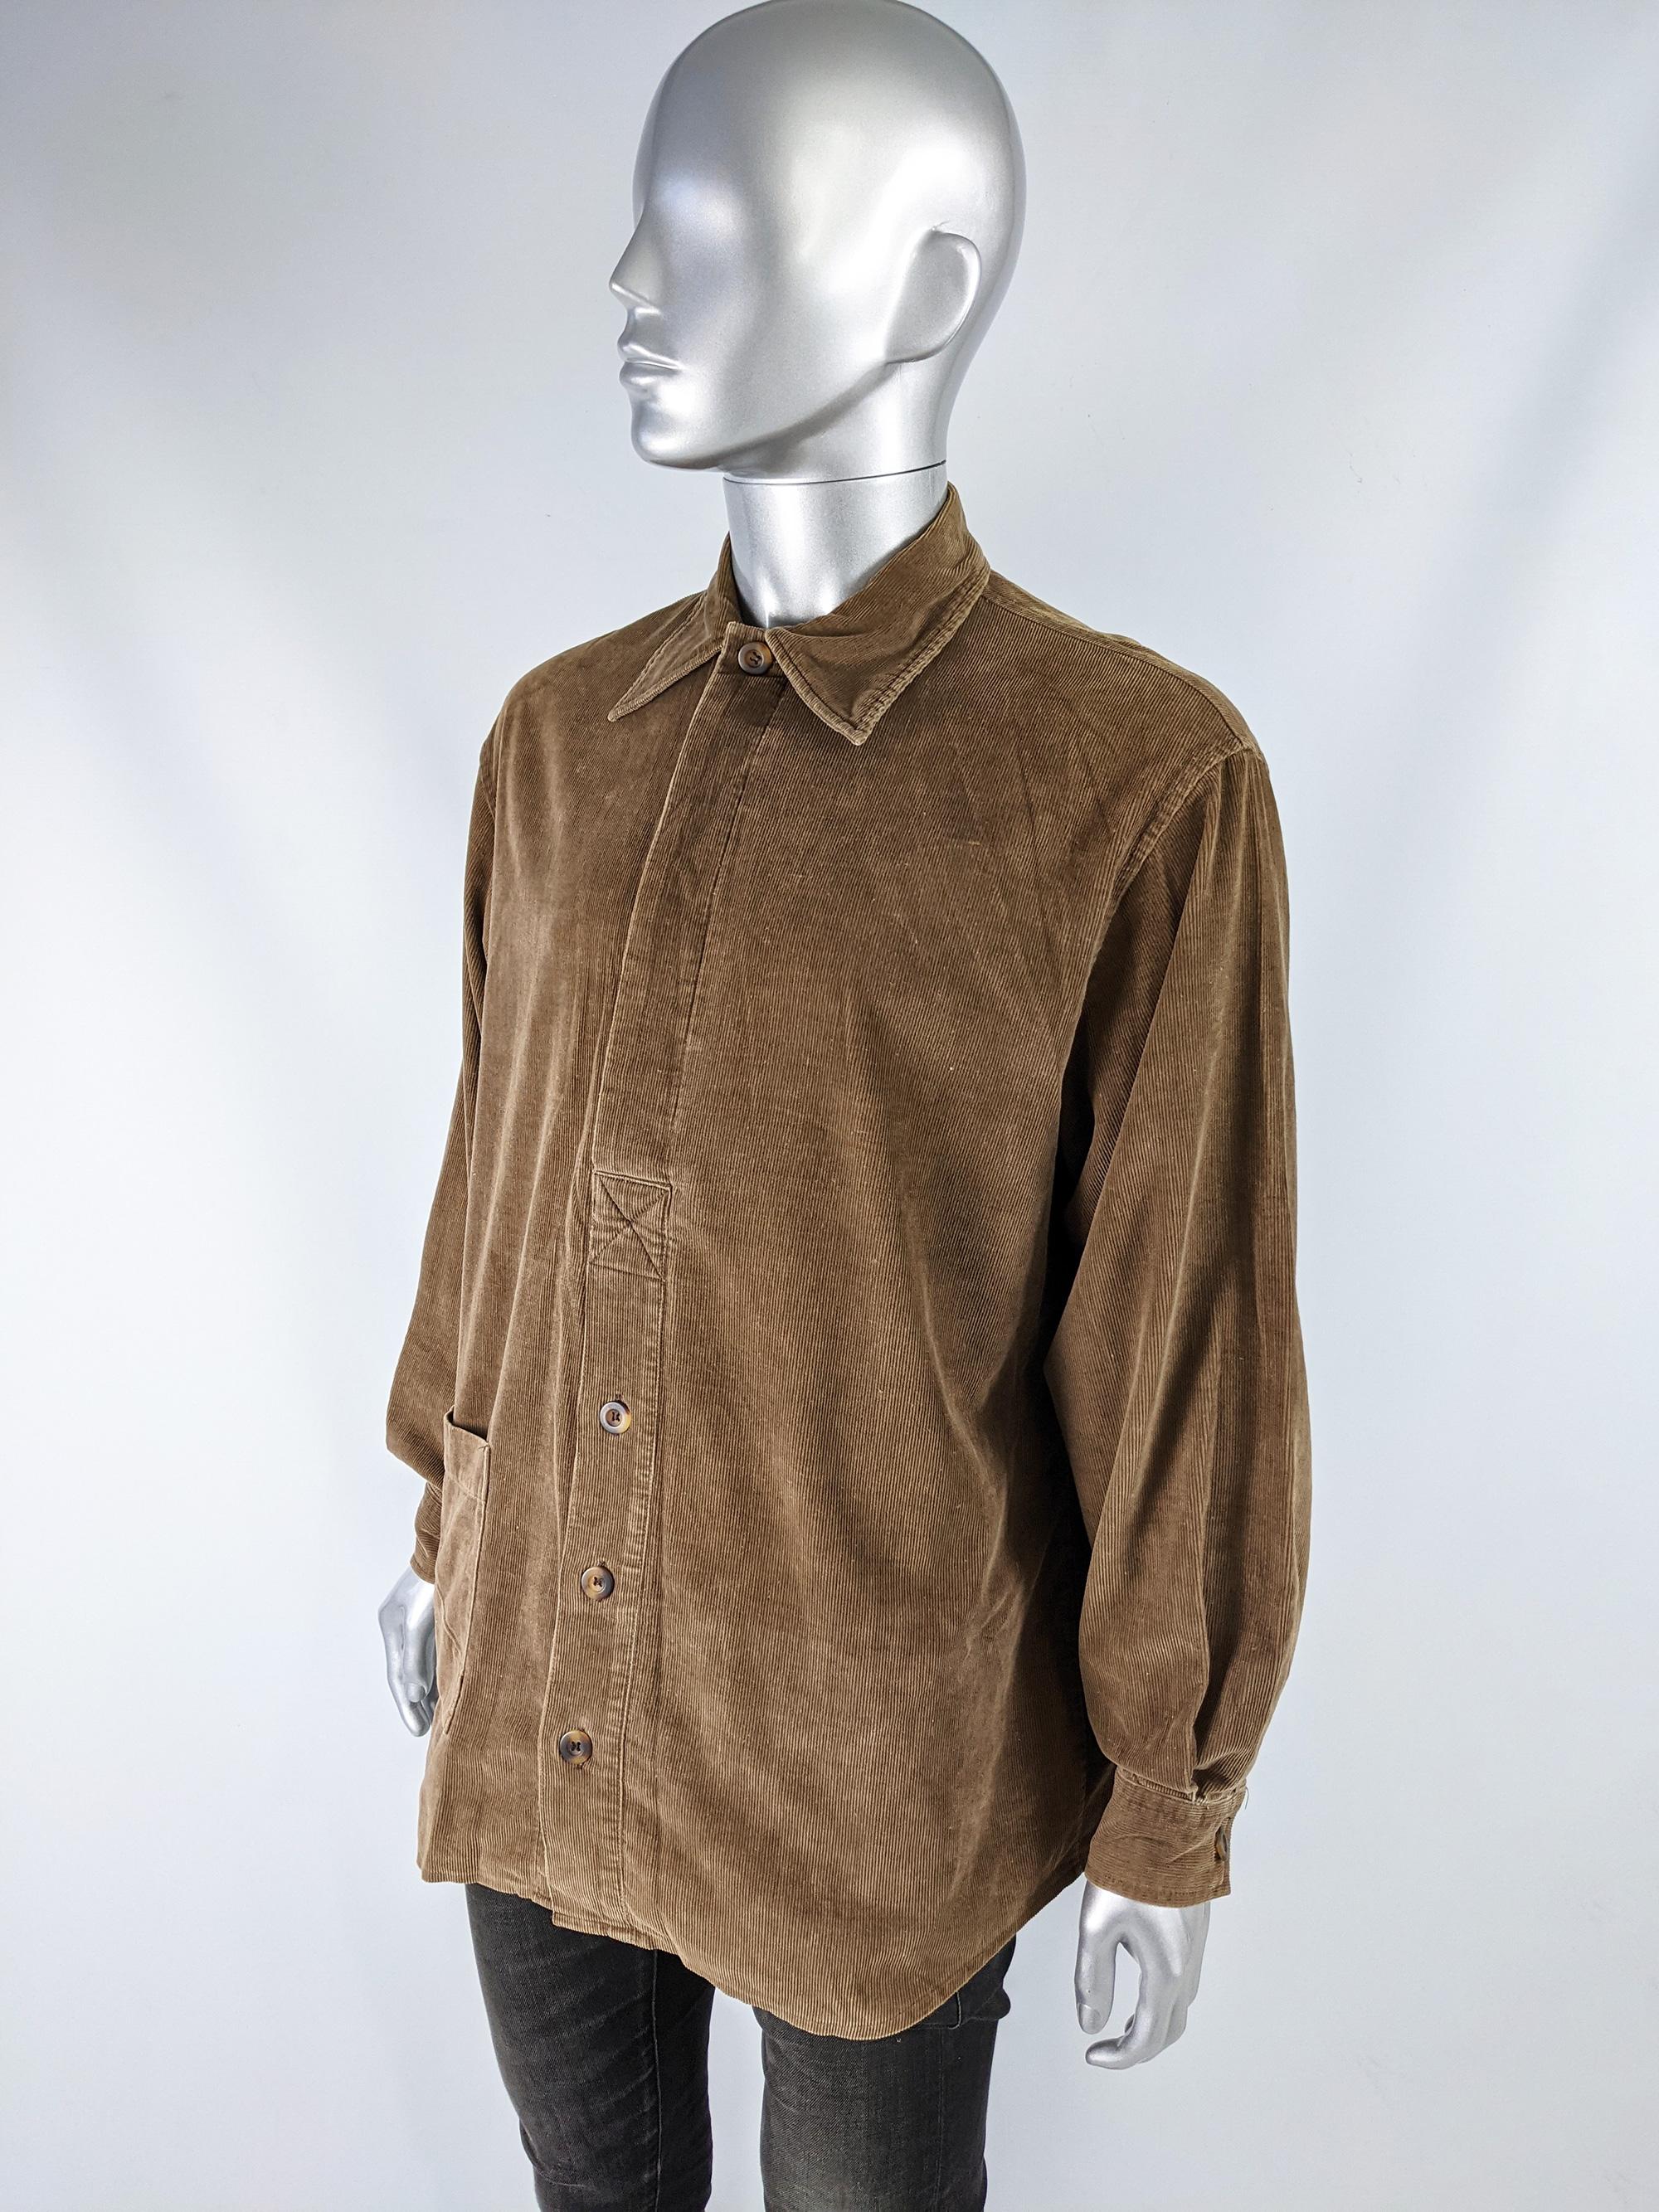 Joe Casely Hayford Vintage Brown Cord Shirt, 1990s In Excellent Condition For Sale In Doncaster, South Yorkshire